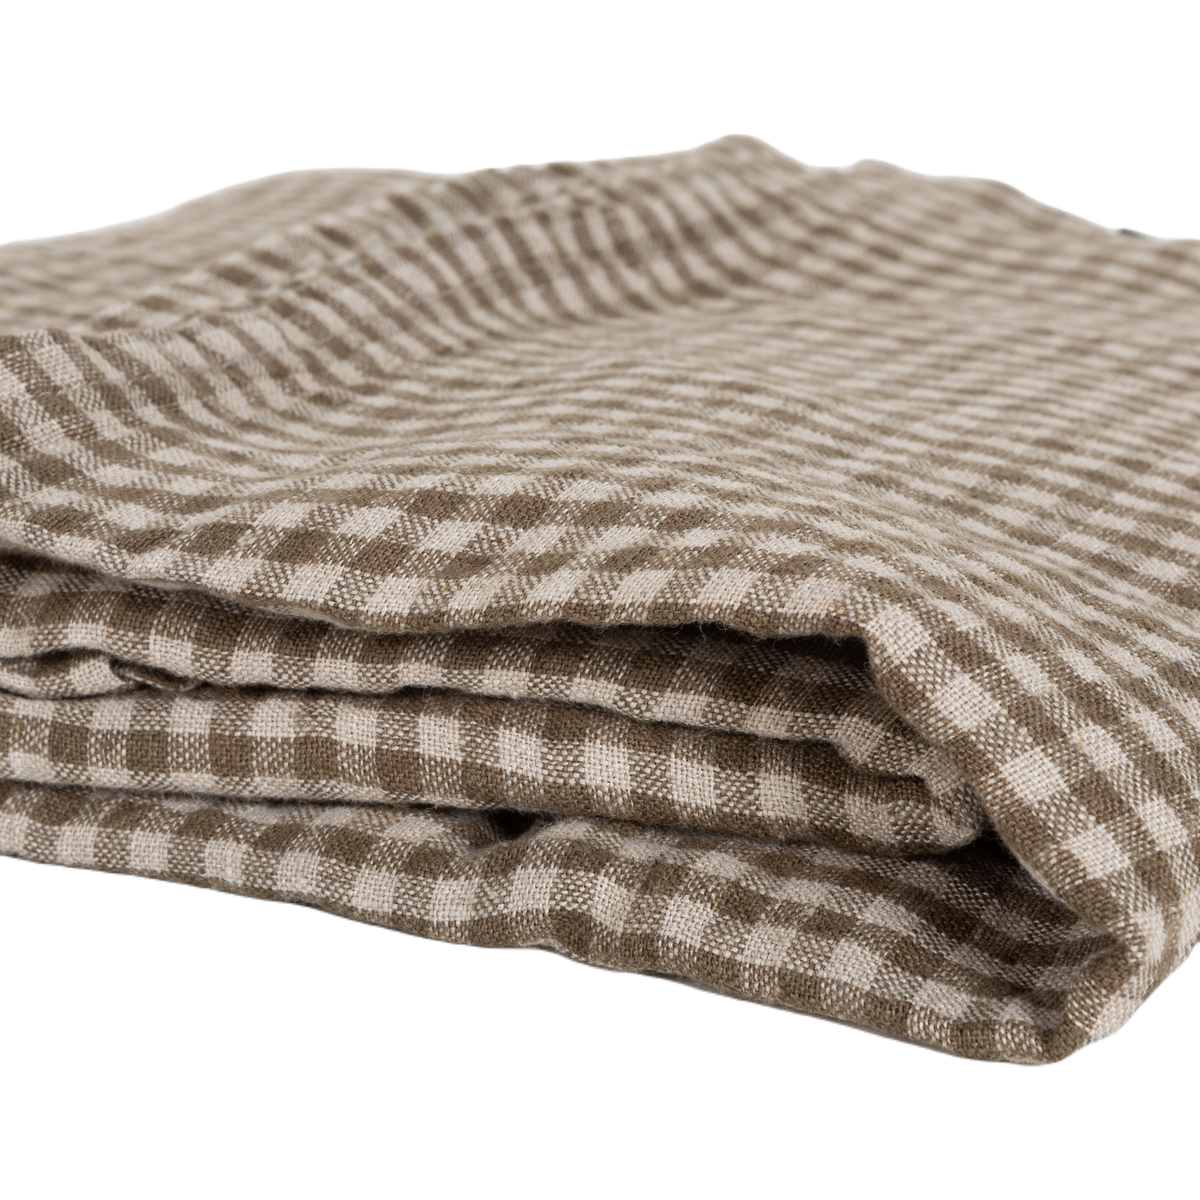 Perfect for any season with its timeless checked pattern, the Linen Check Tablecloth elevates your tabletop with a rich natural texture and a charming pattern.